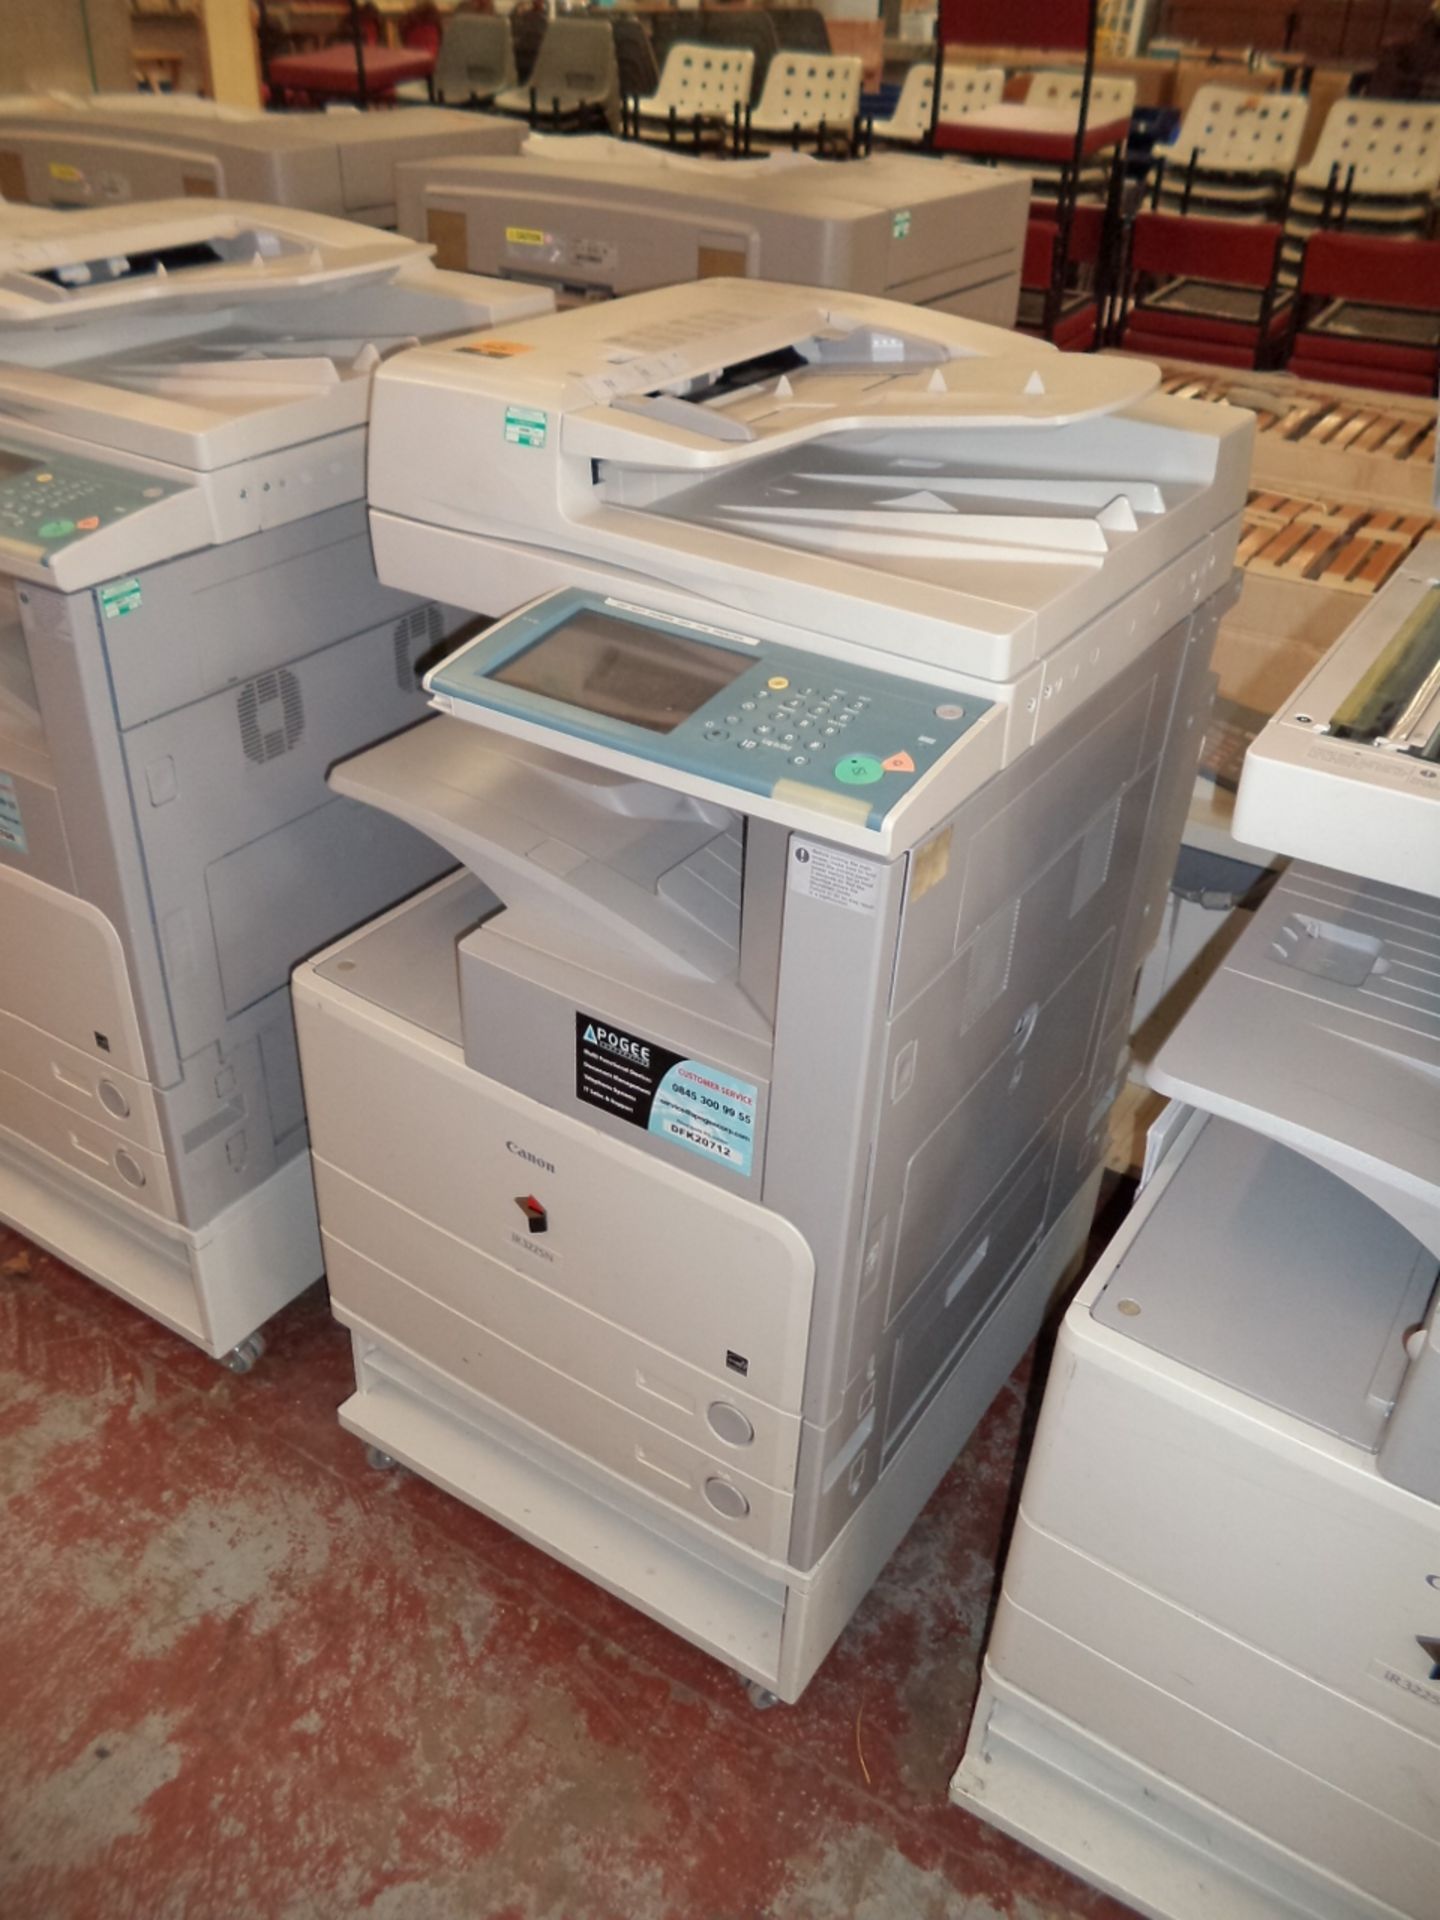 Canon model IR3225N floorstanding copier incorporating 2 off paper cassettes each adaptable for A3